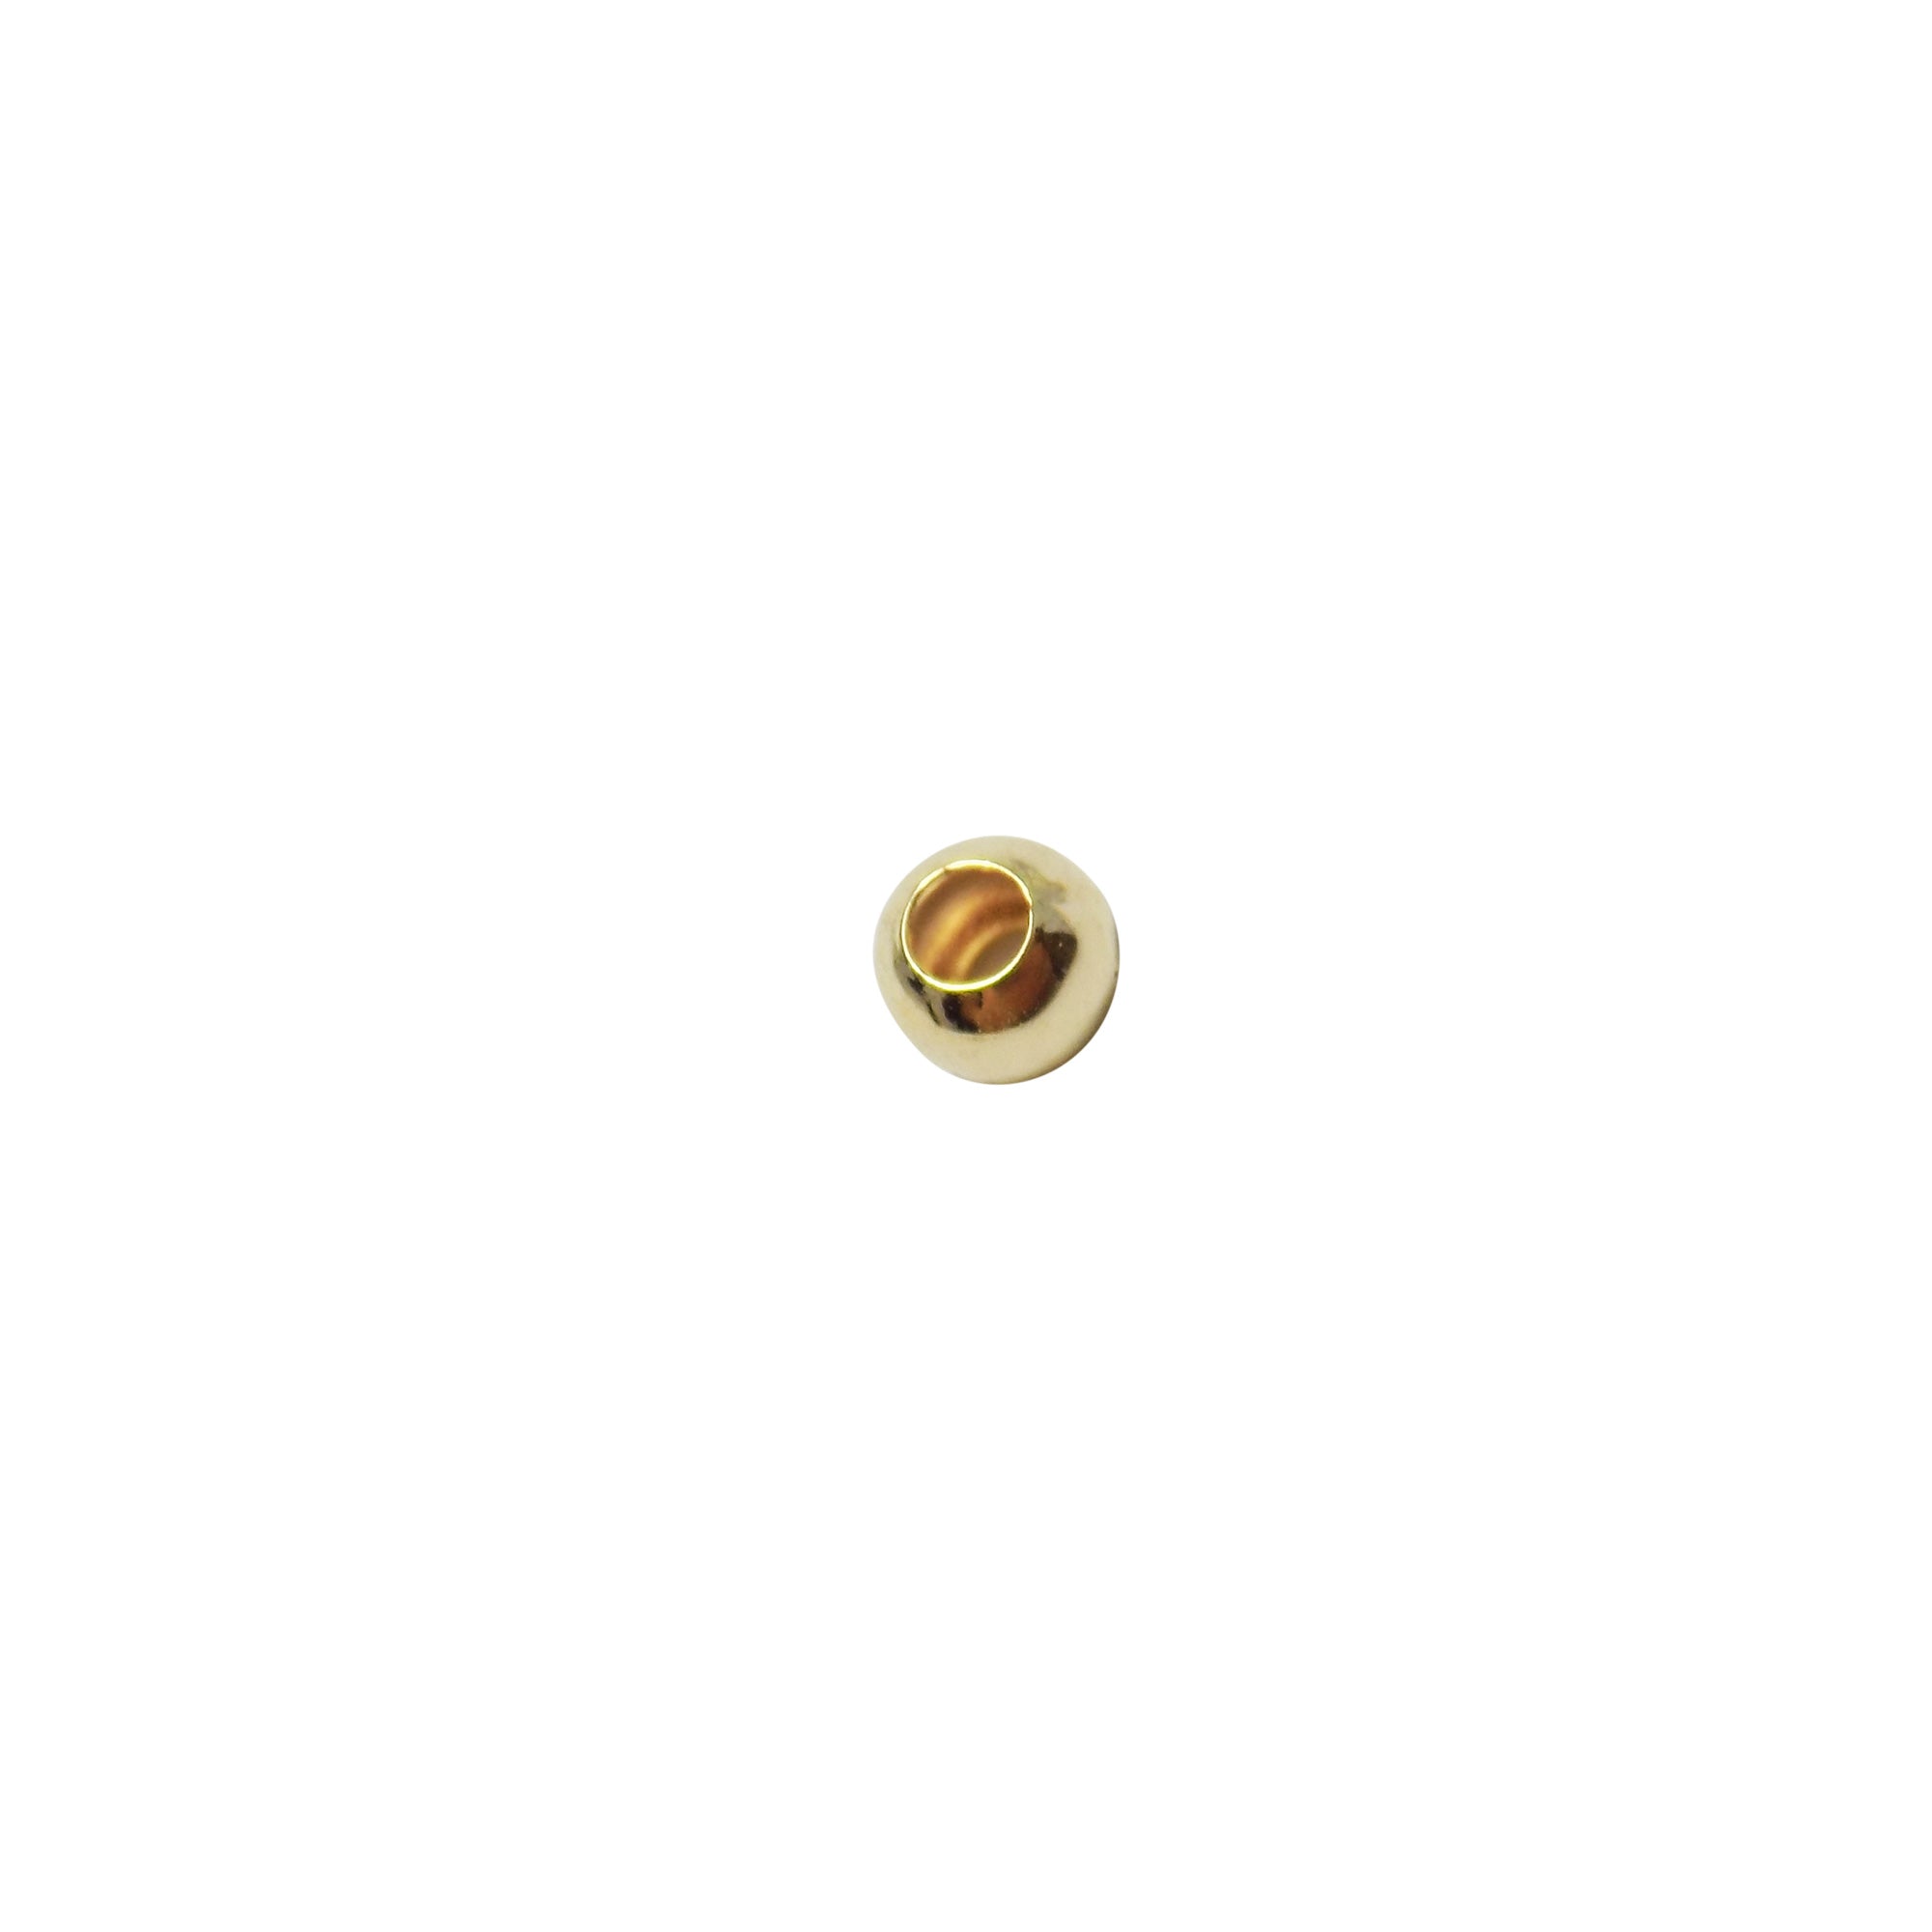 Round Beads 3mm 18K Gold Plated Hole 1.1mm High Quality